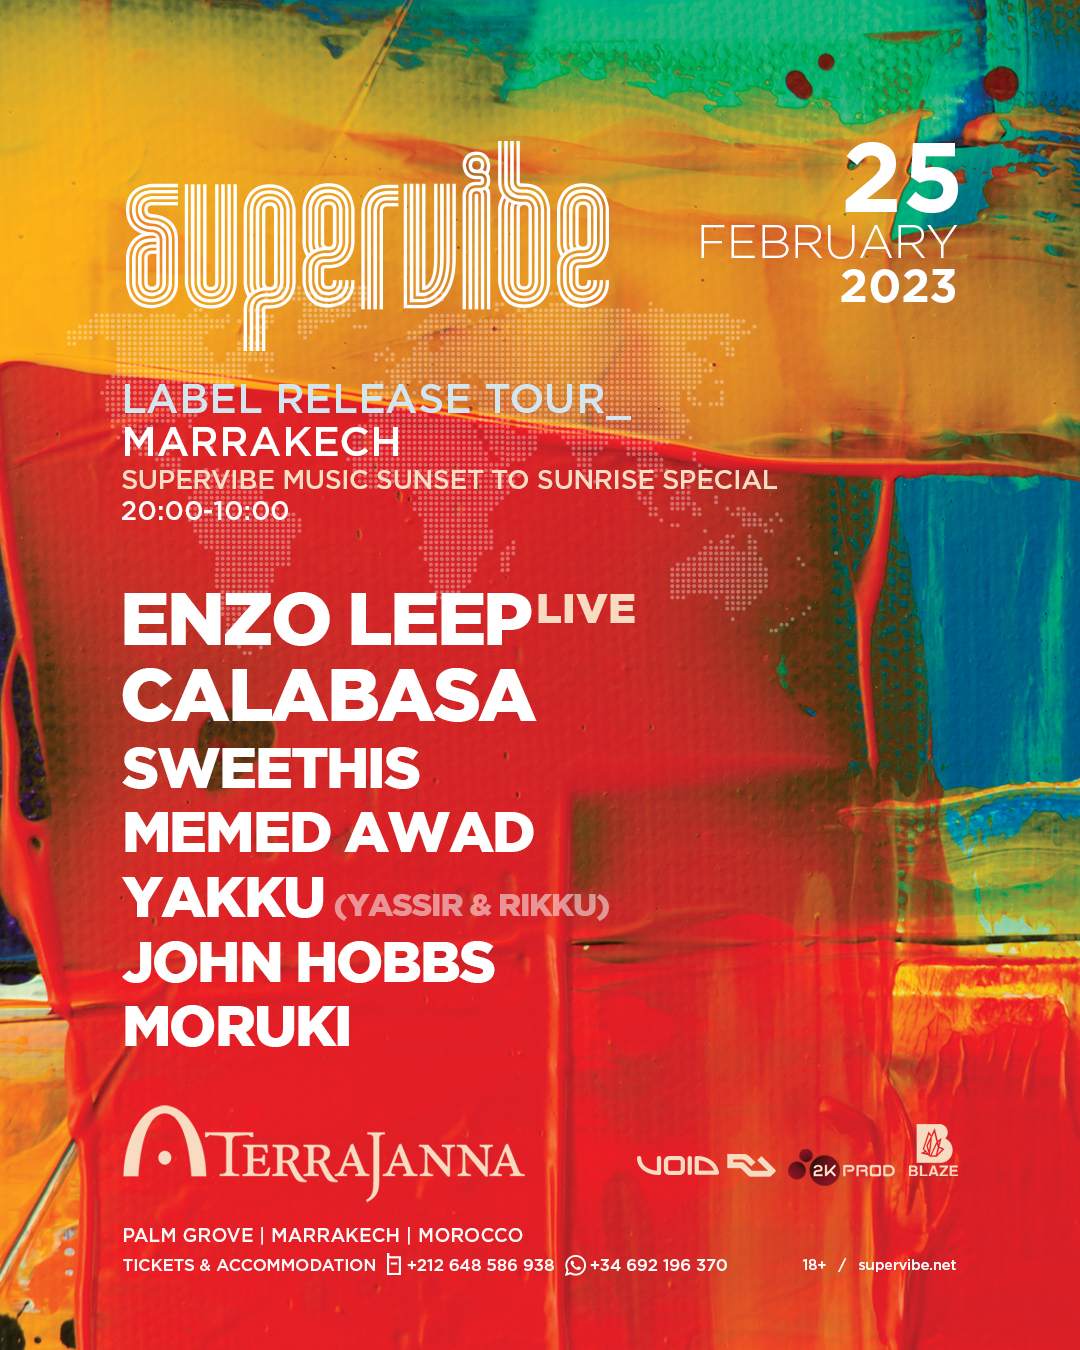 Supervibe Music label release tour - フライヤー表